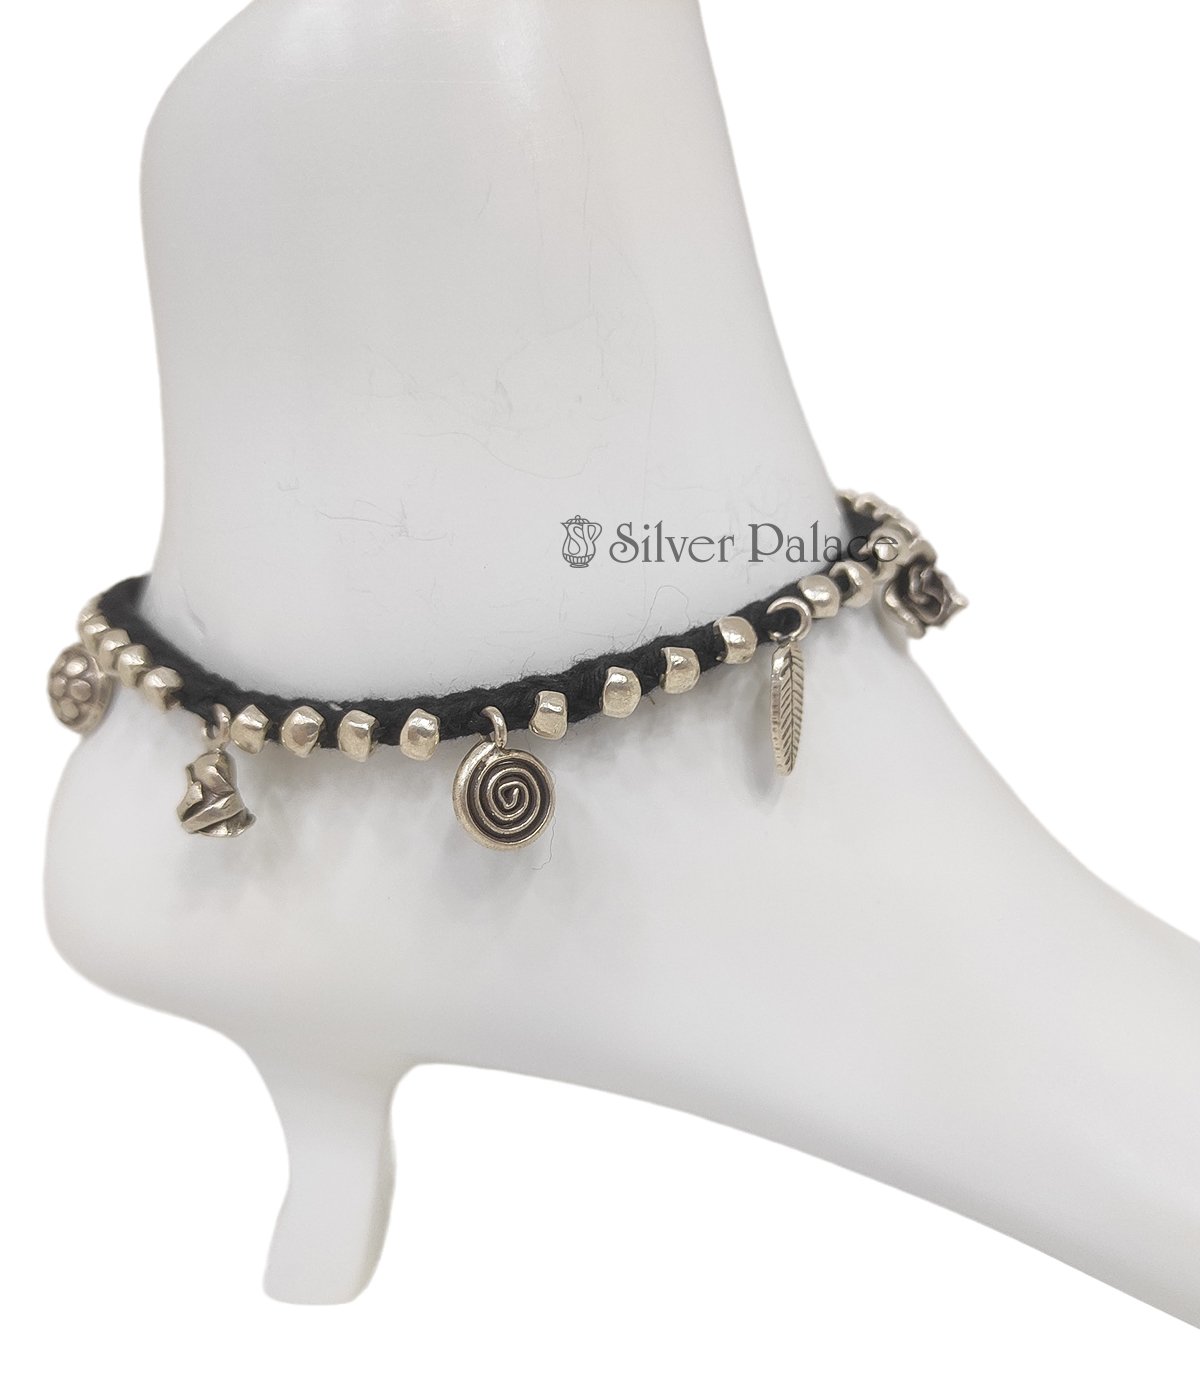 Black Thread Silver Anklet - Silver Palace